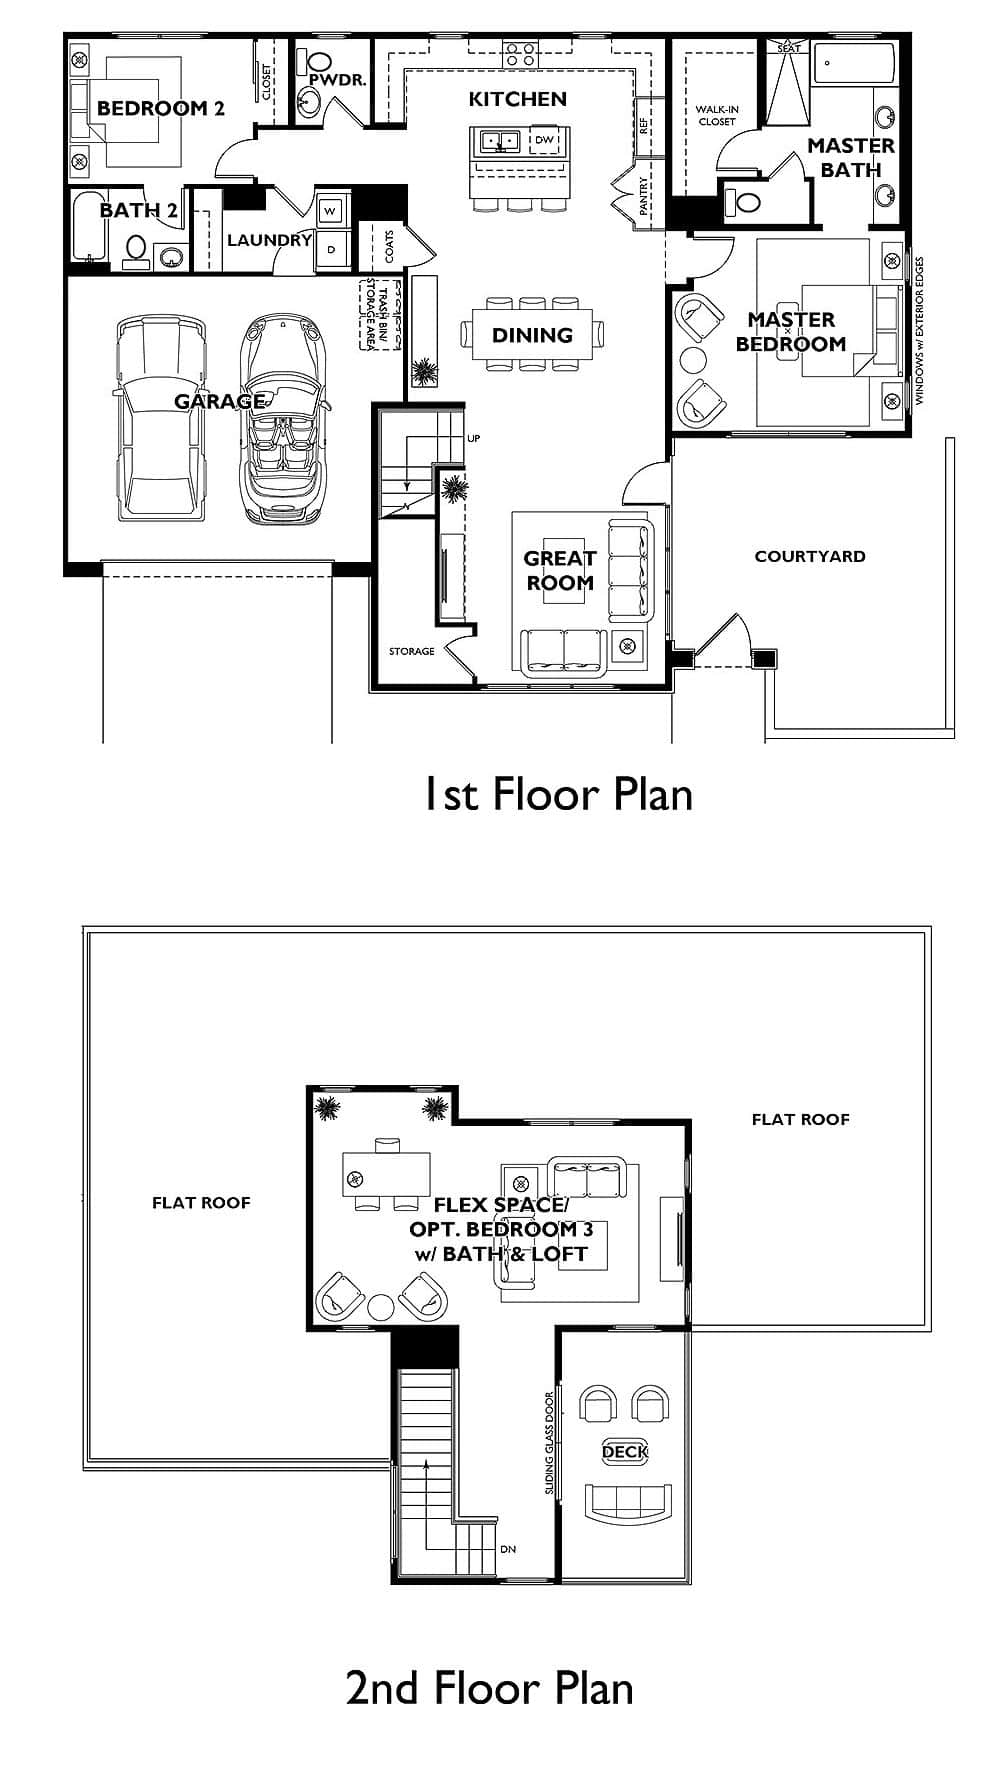 Floorplan of Splendor Model in Luxe Collection in Trilogy by Shea Homes in South Square in Summerlin